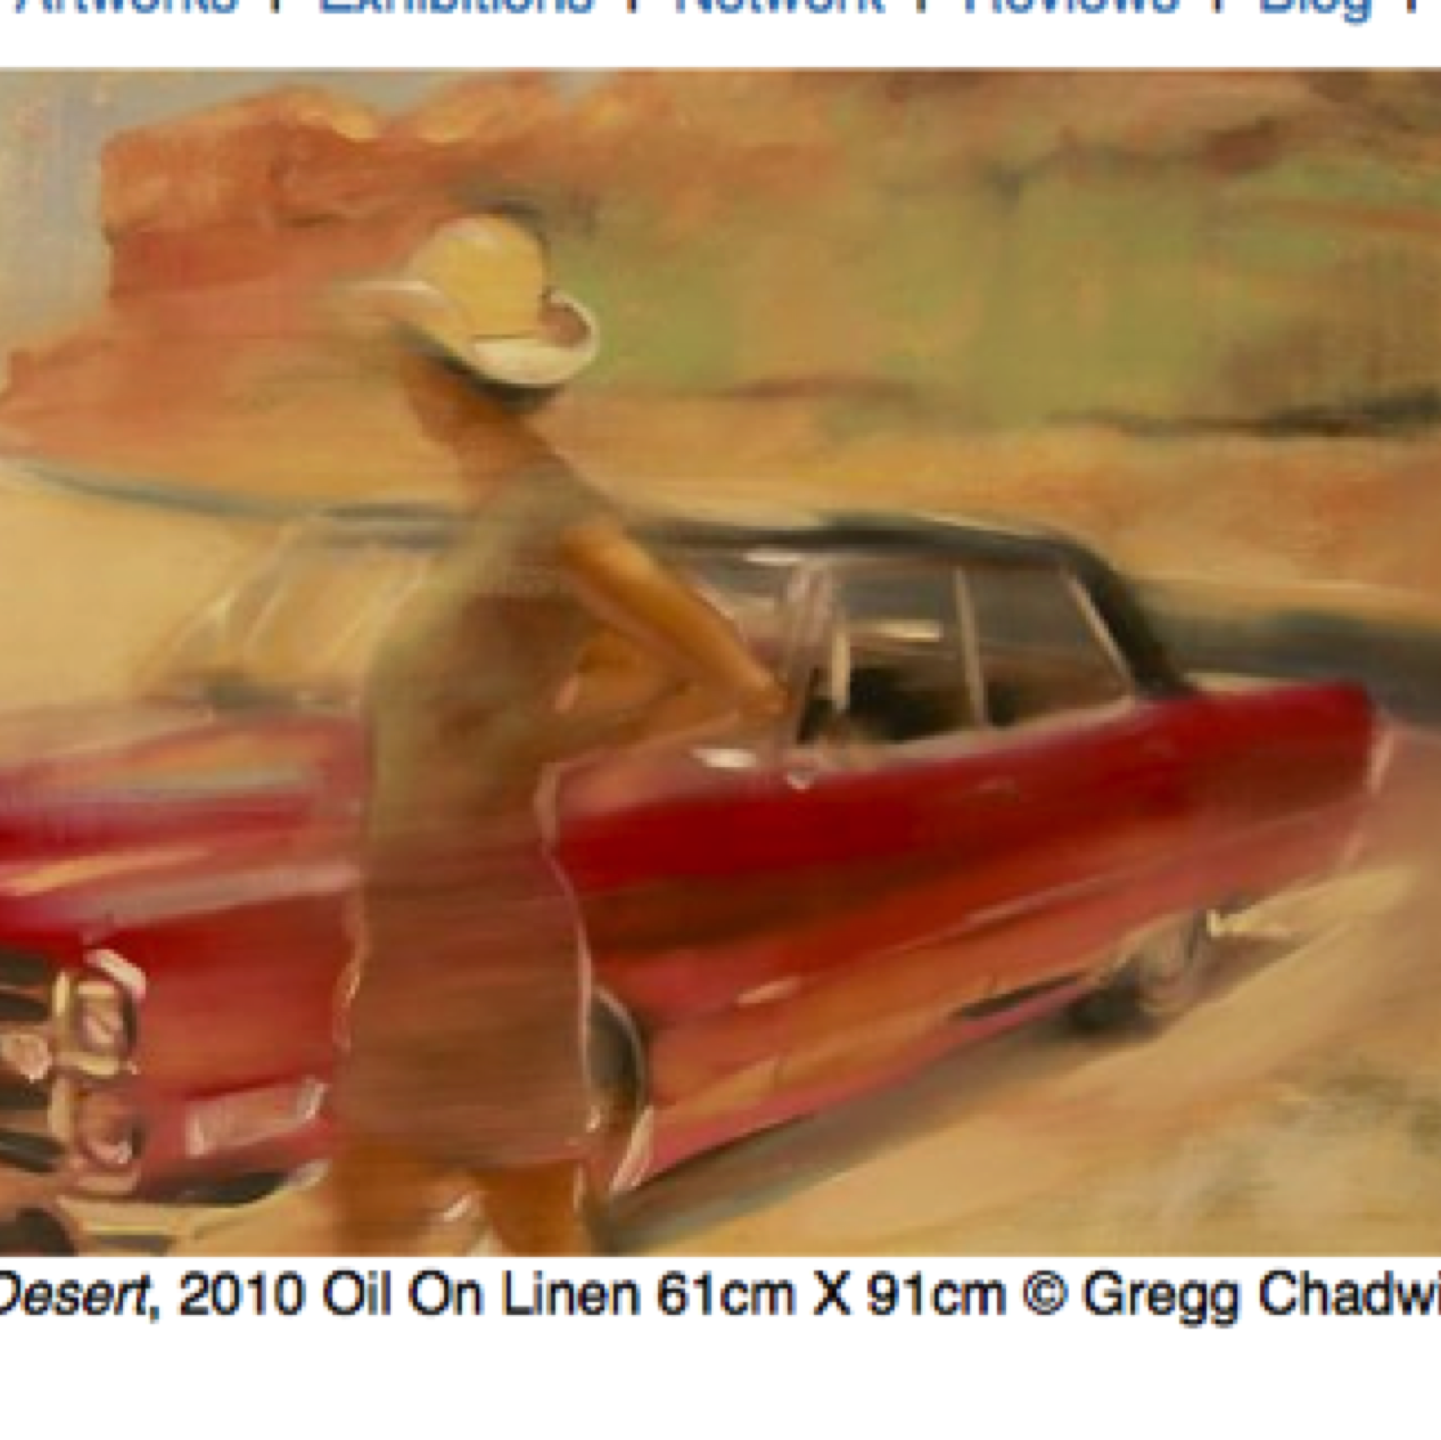 Gregg Chadwick's Cadillac Desert on Flyer for his Solo Exhibition at Manifesta Maastricht - September 2010